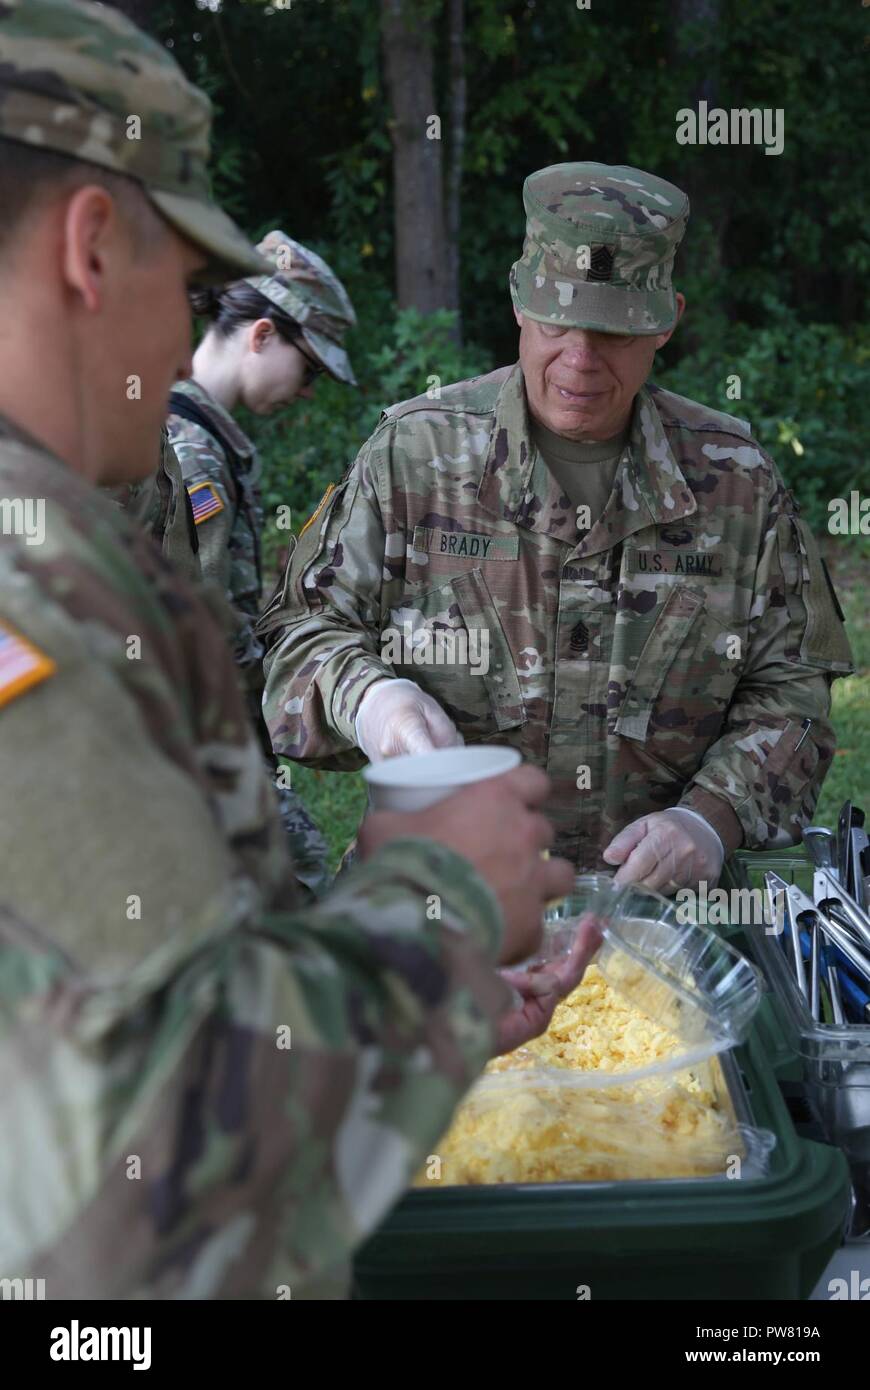 U.S. Army Command Sgt. Maj. Matthew Brady, assigned to Regional Health Command - Atlantic, serves hot breakfast to the competitors after the 2017 Best Medic Competition at Fort Bragg, N.C., Sept. 20, 2017. The competition tested the physical and mental toughness, as well as the technical competence, of each medic to identify the team moving forward to represent the region at the next level of the competition. Stock Photo